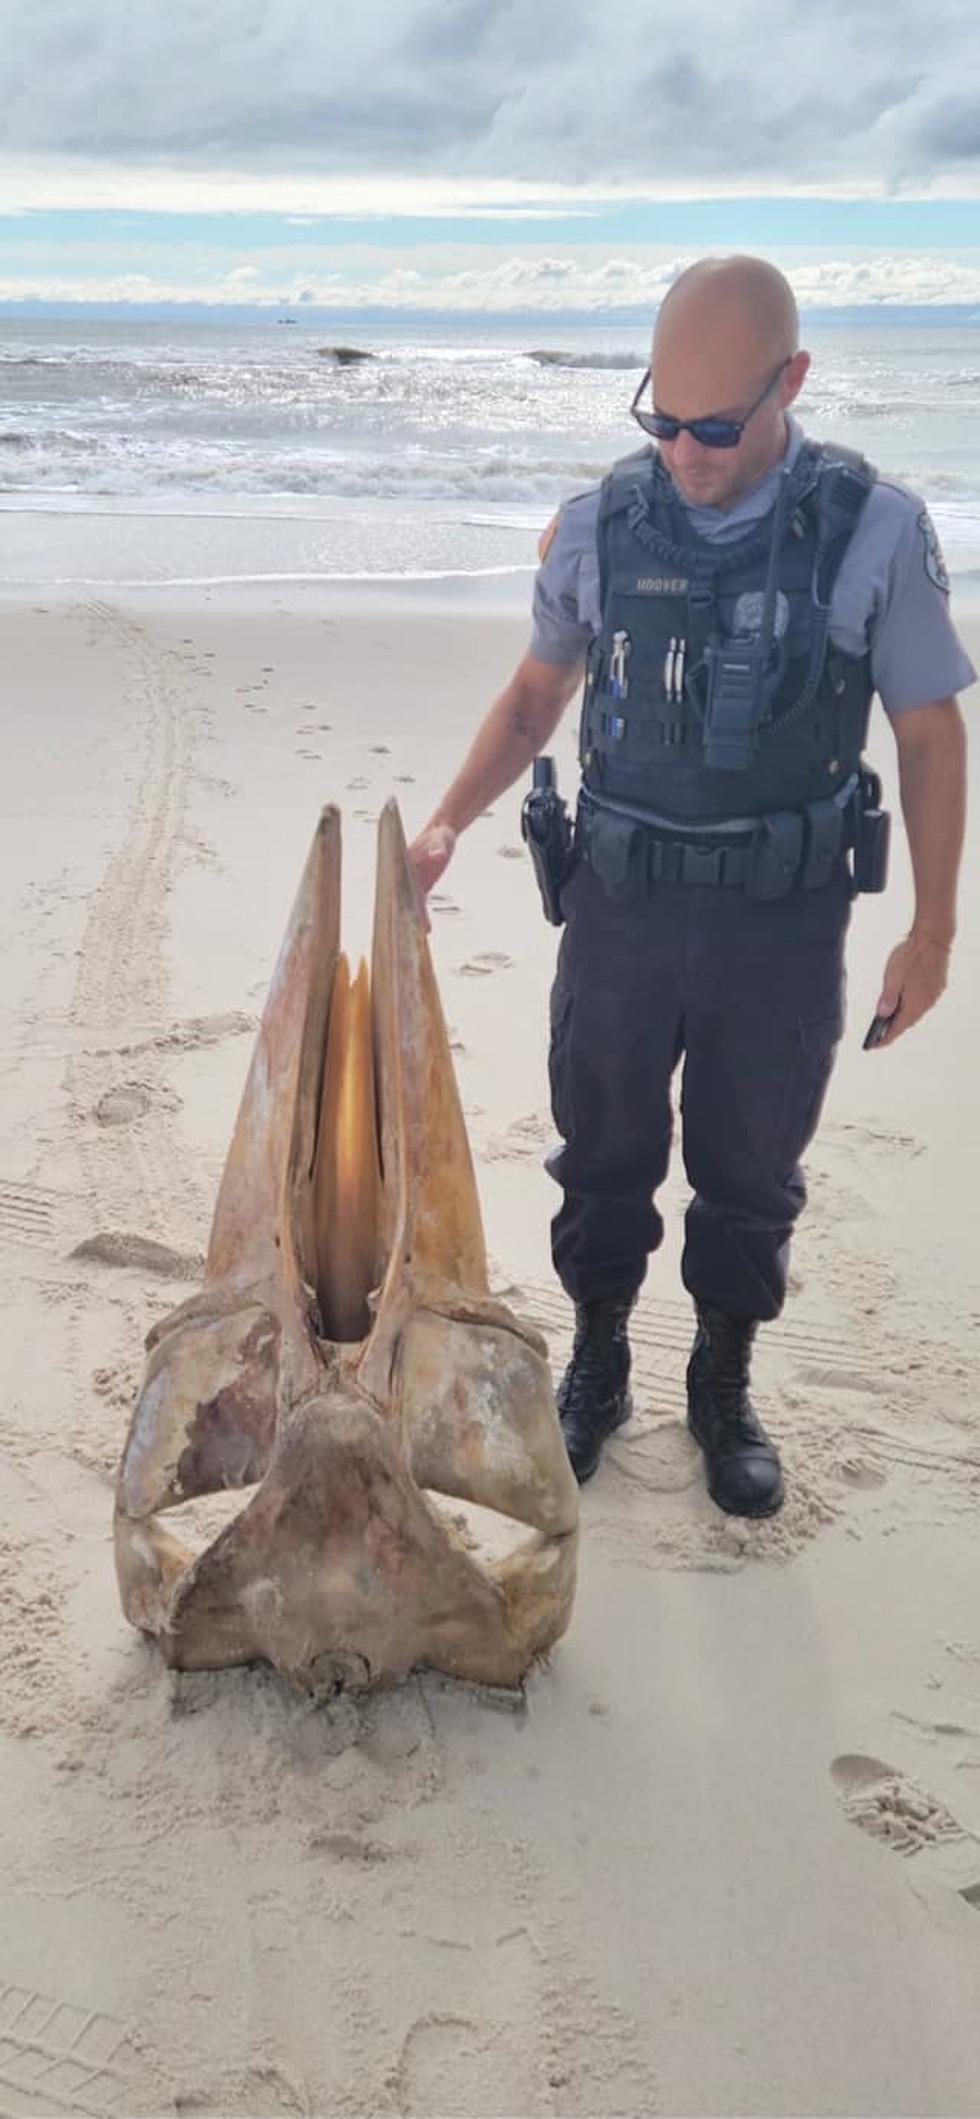 Mystery of Massive Seaside Park, New Jersey Washed Up Skull Solved